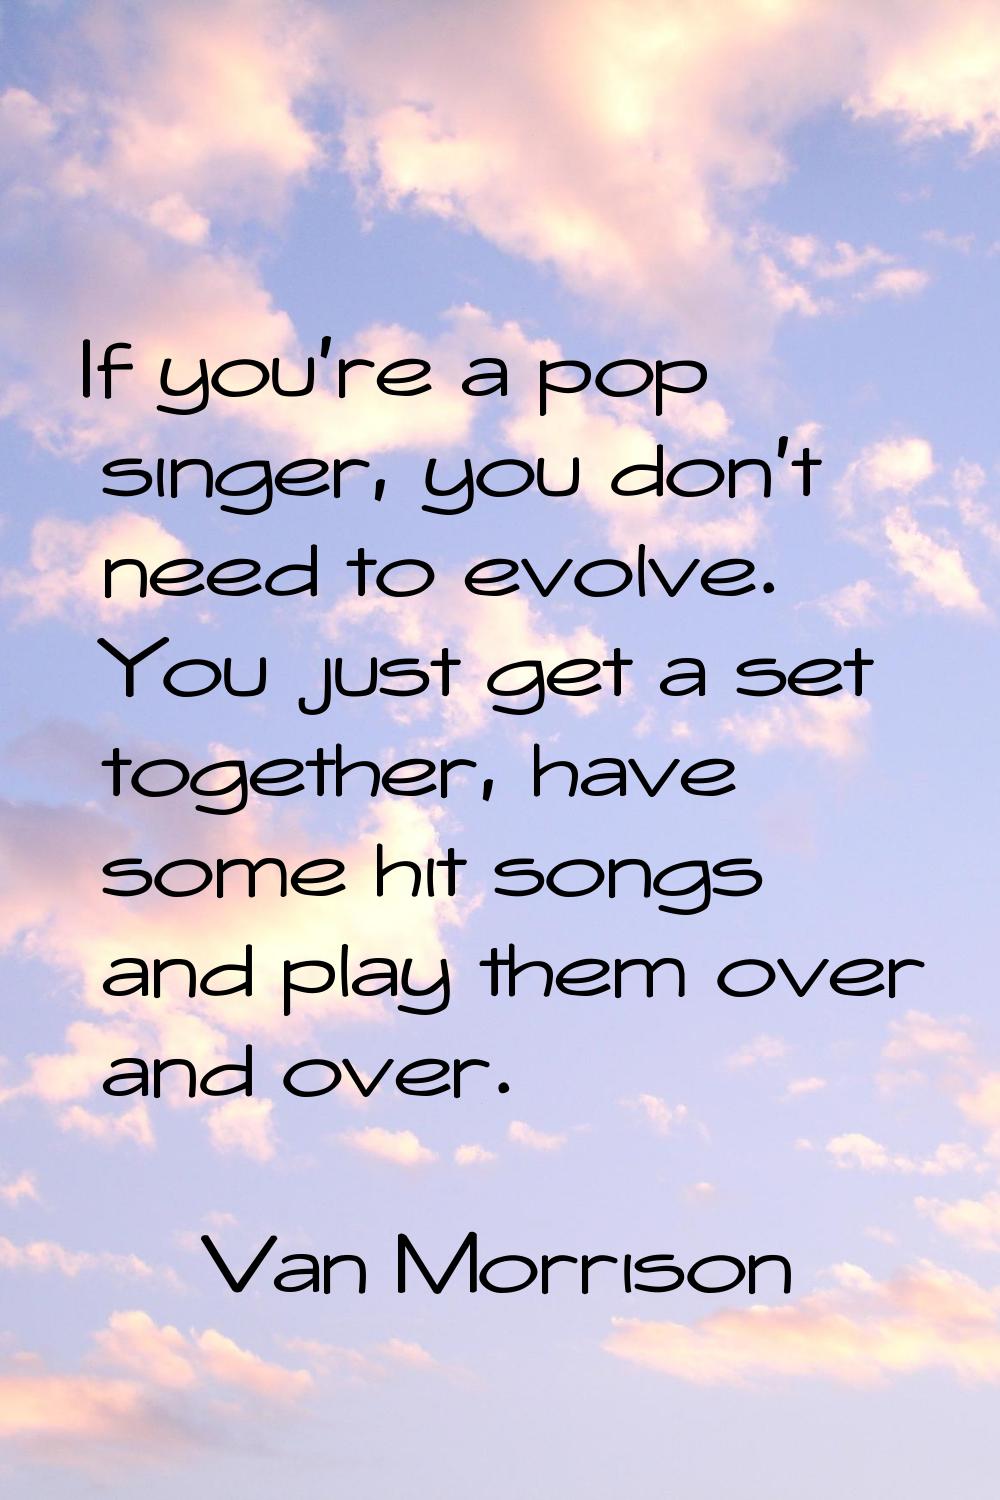 If you're a pop singer, you don't need to evolve. You just get a set together, have some hit songs 